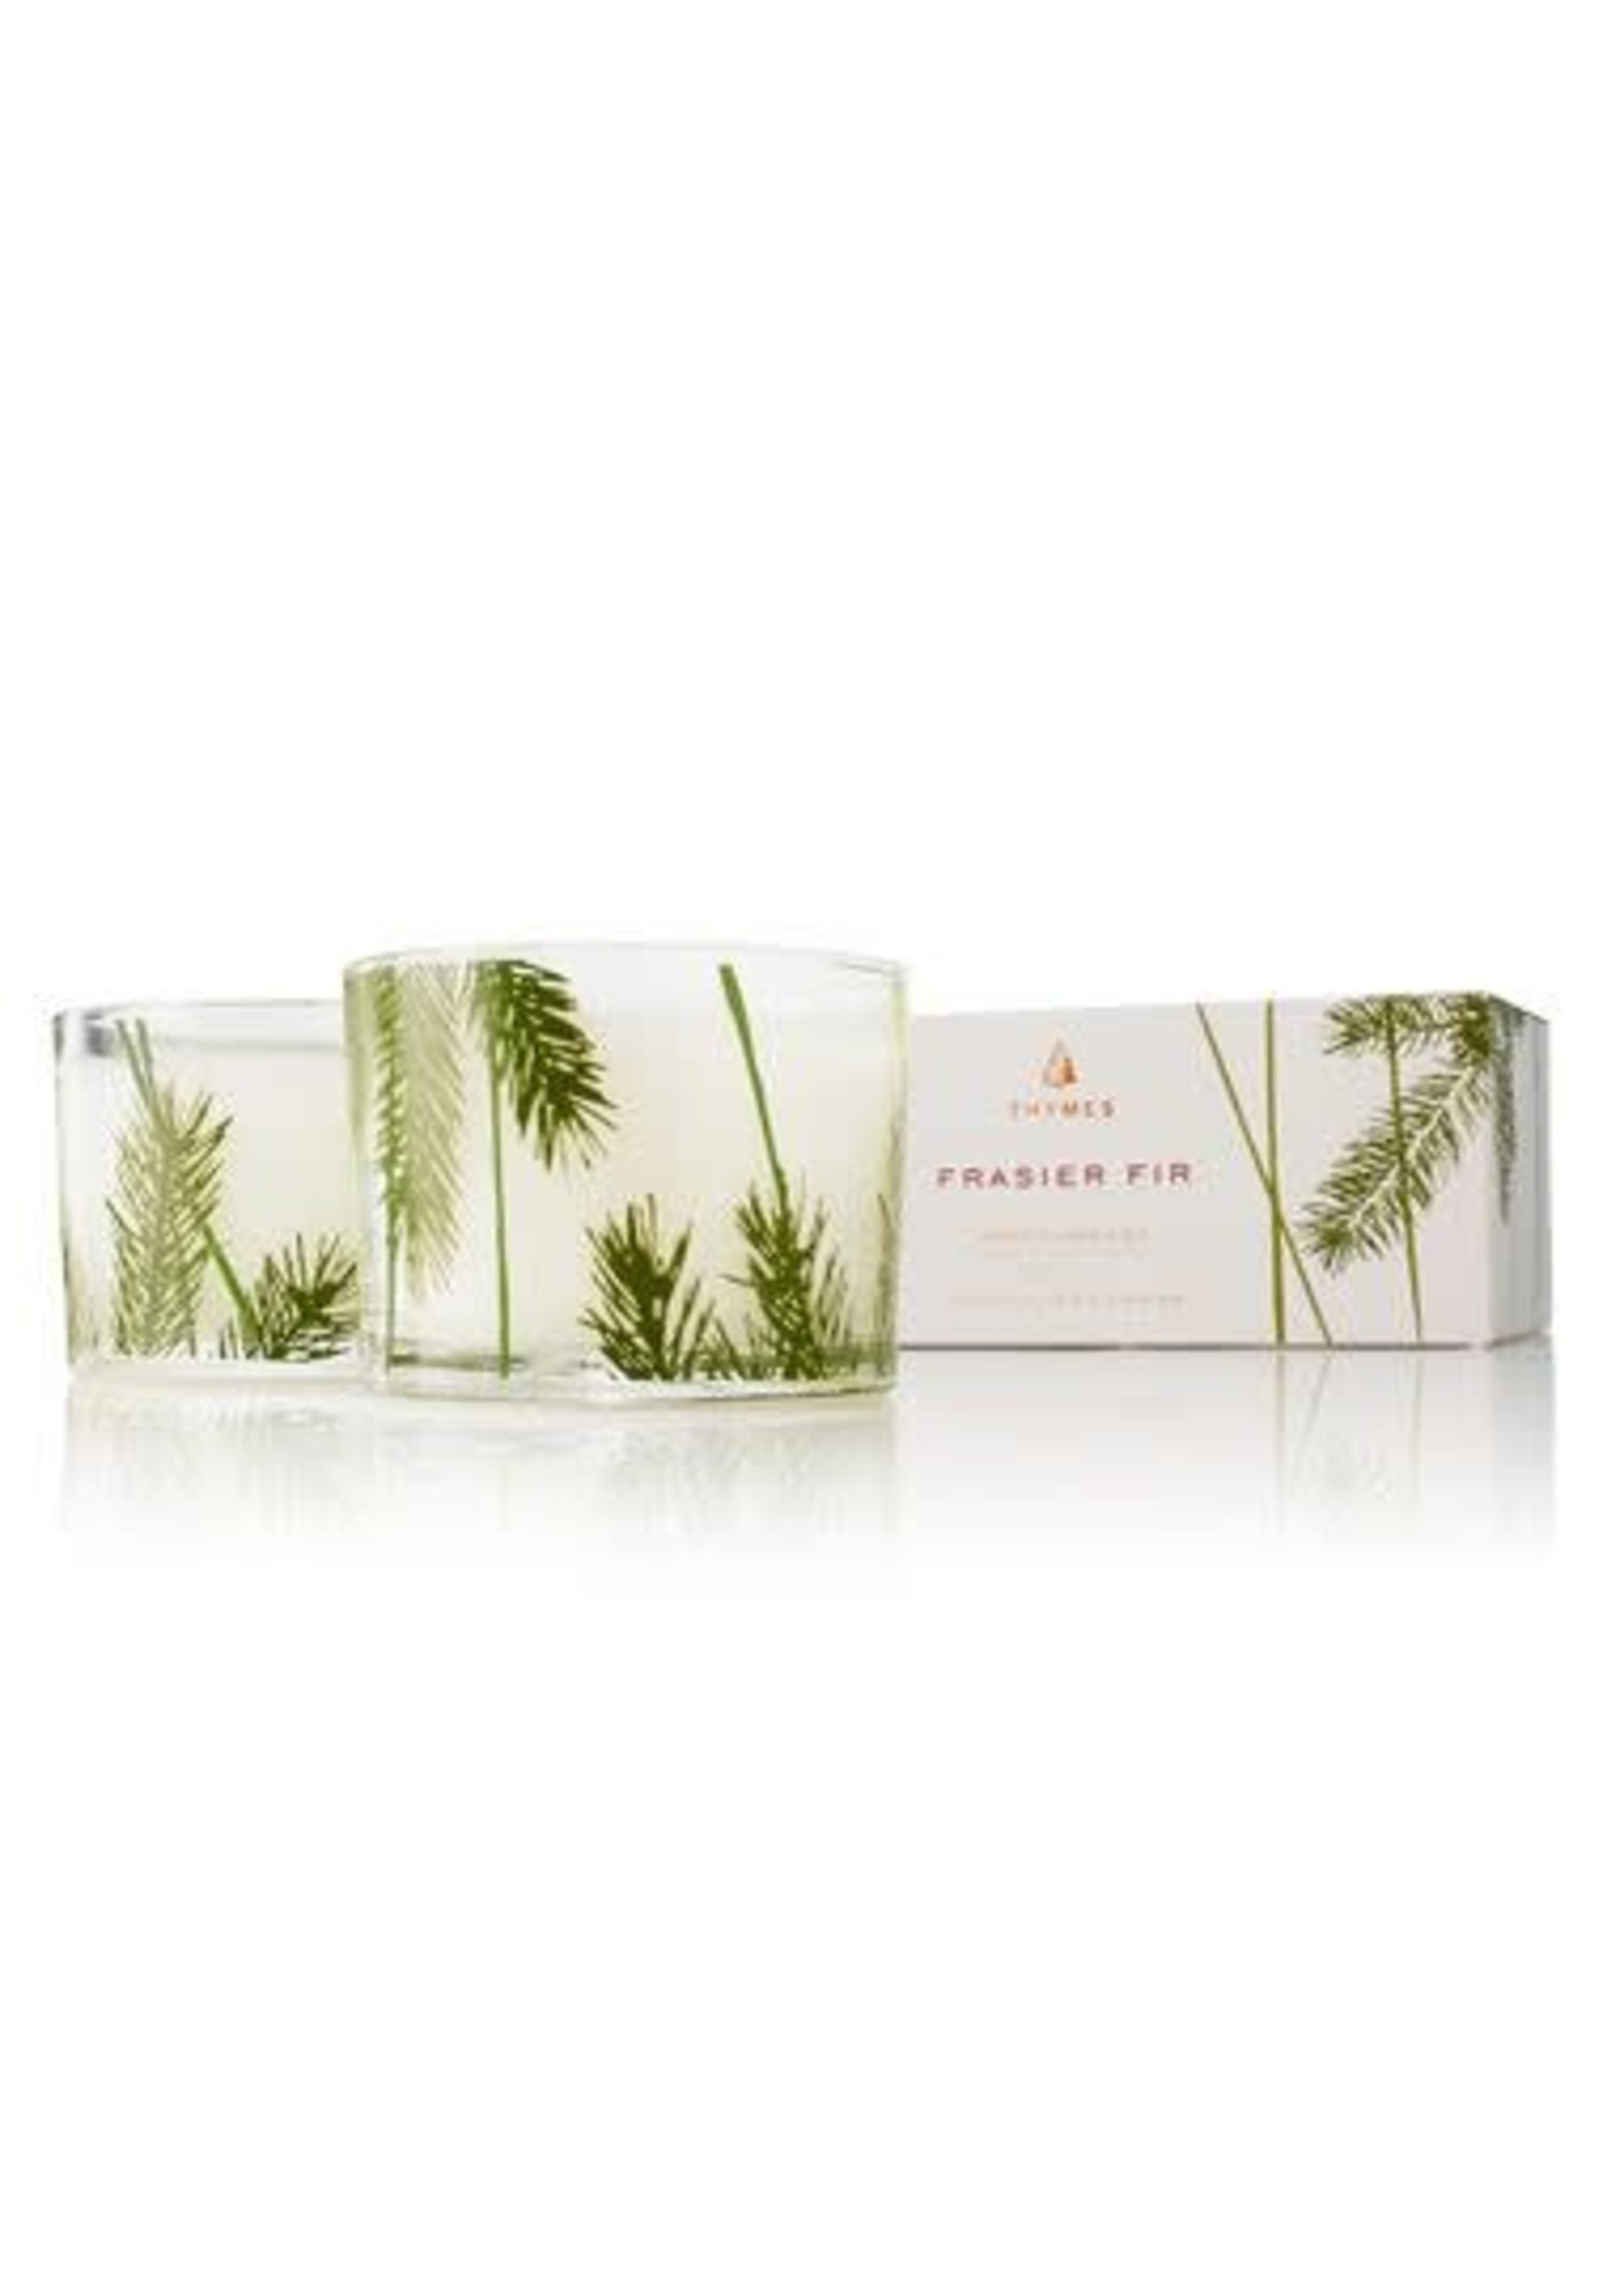 The Thymes Frasier Fir Poured Candle Set, Pine Needle Design